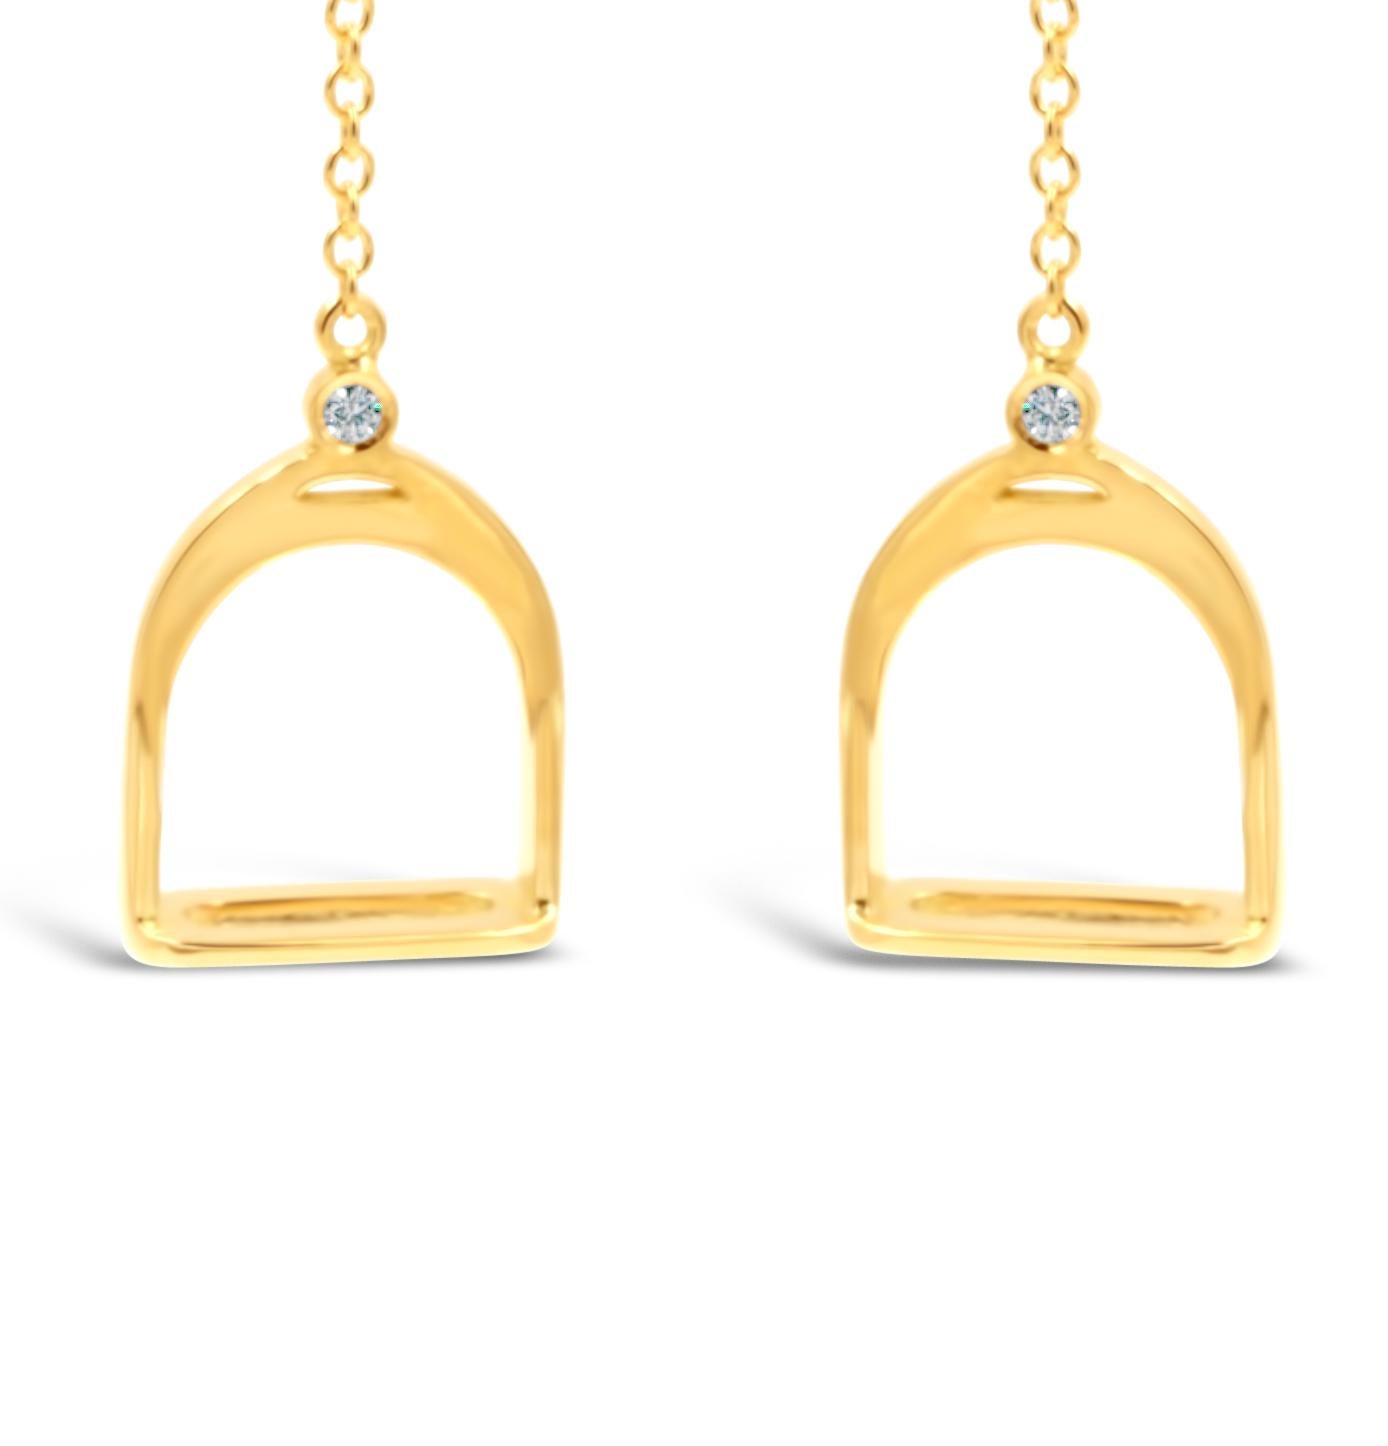 Round Cut Garavelli 18 Kt Yellow Gold Diamonds Stirrups Collection Dangling Earrings For Sale